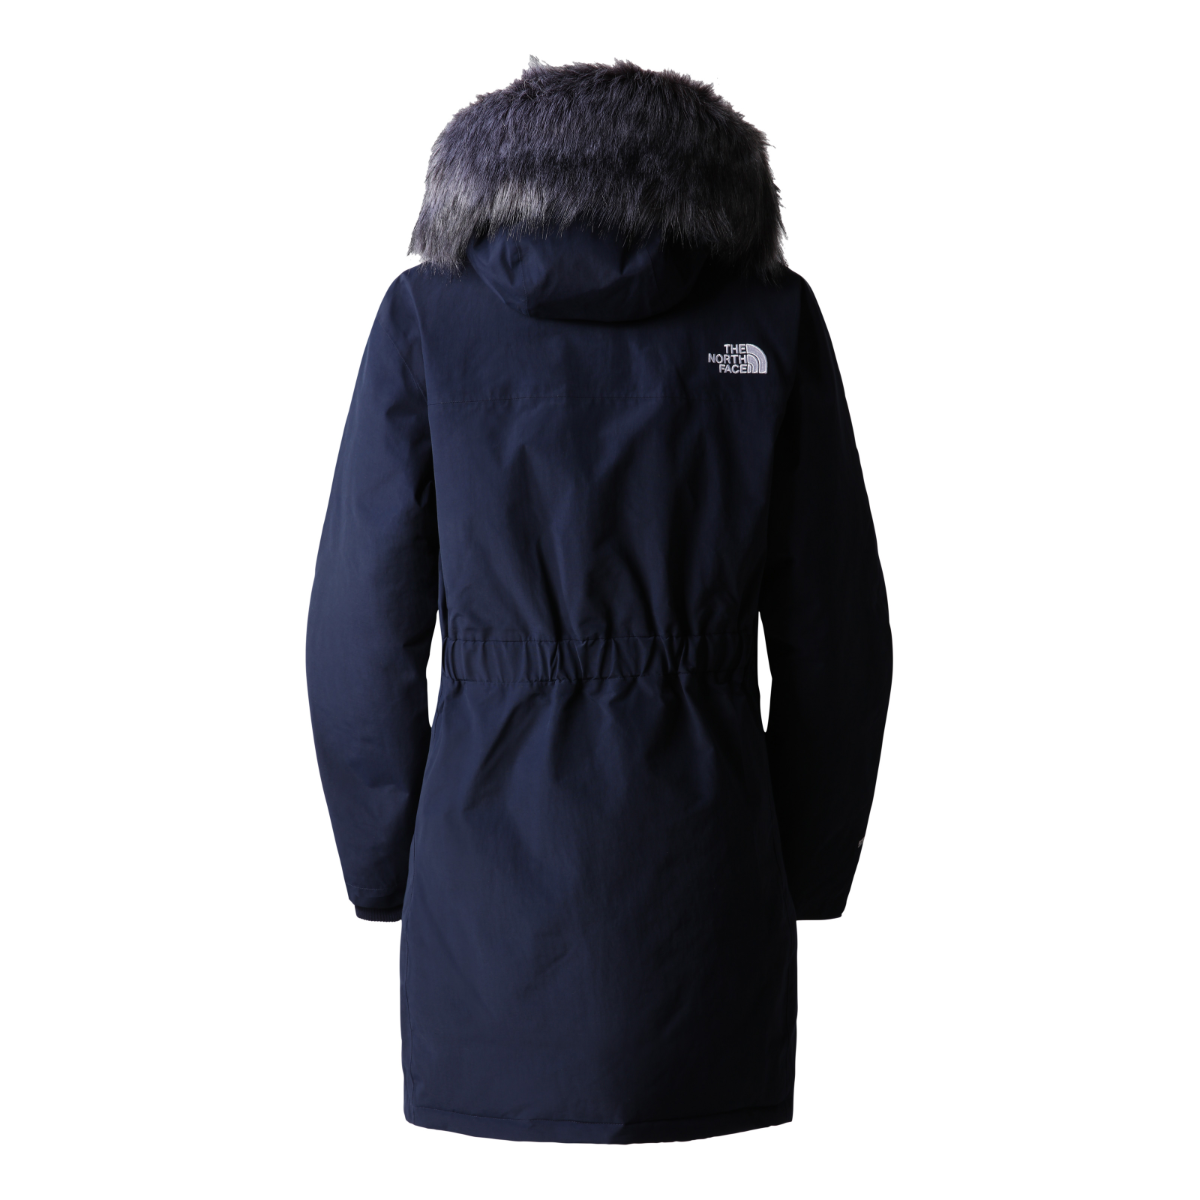 The North Face Arctic Parka Insulated Women's Jacket | Summit Navy